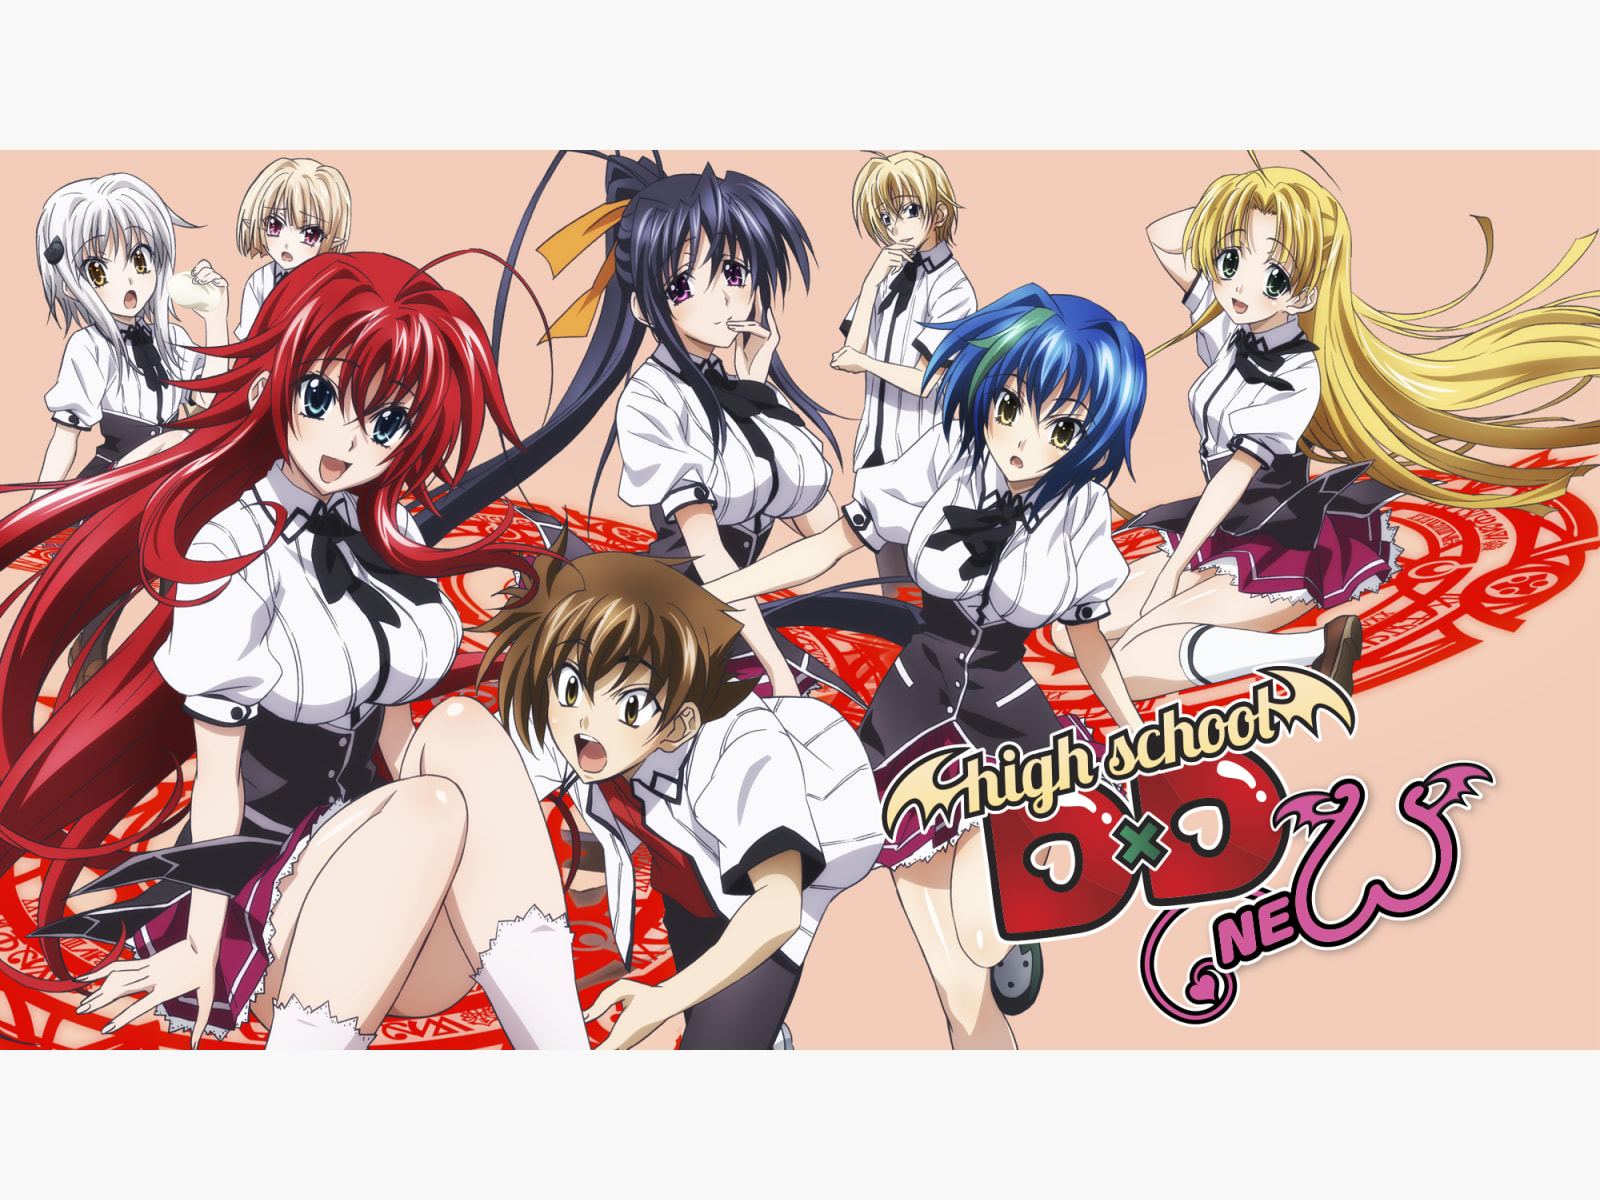 dale h edwards recommends highschool dxd eng sub pic